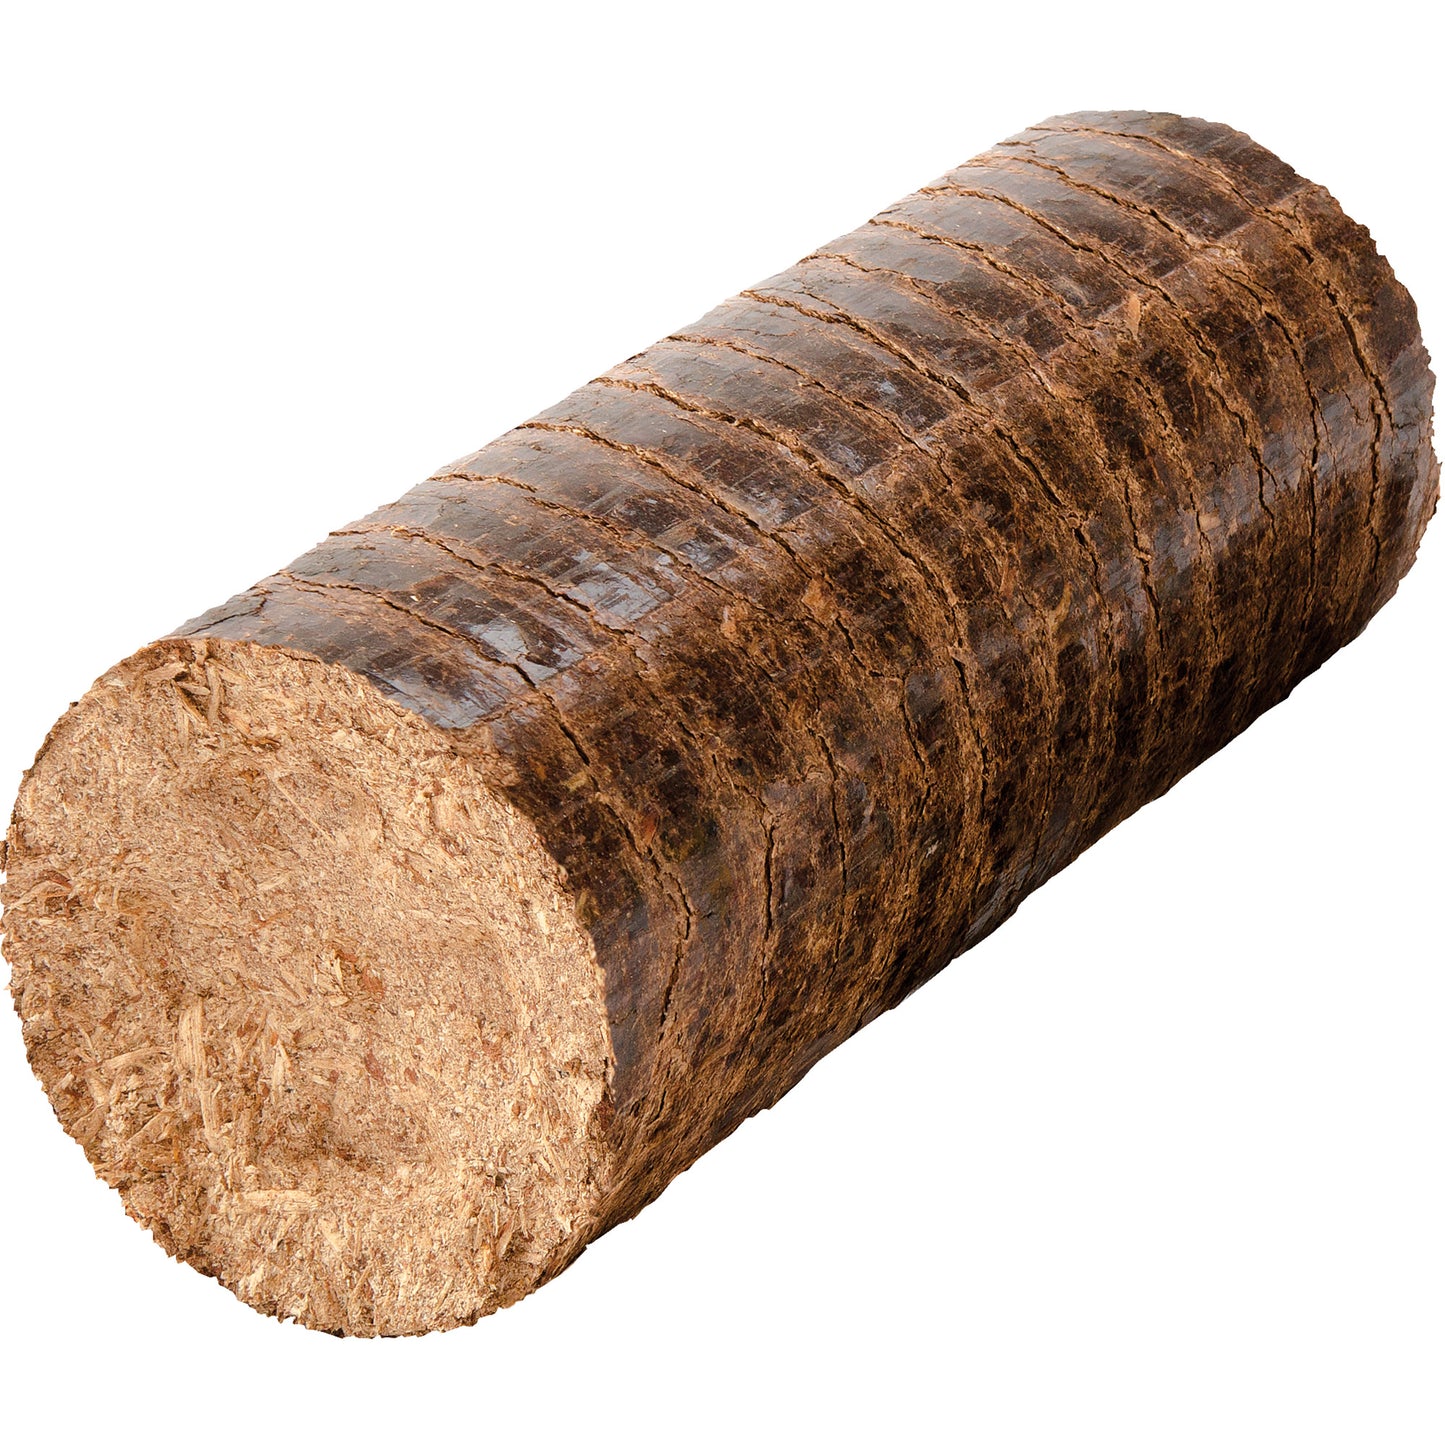 Eco Firewood Eucalyptus 7kg Hot Burning Briquettes for Open fires, charcoal & kiln dried log eco-alternative. (3 Pack)